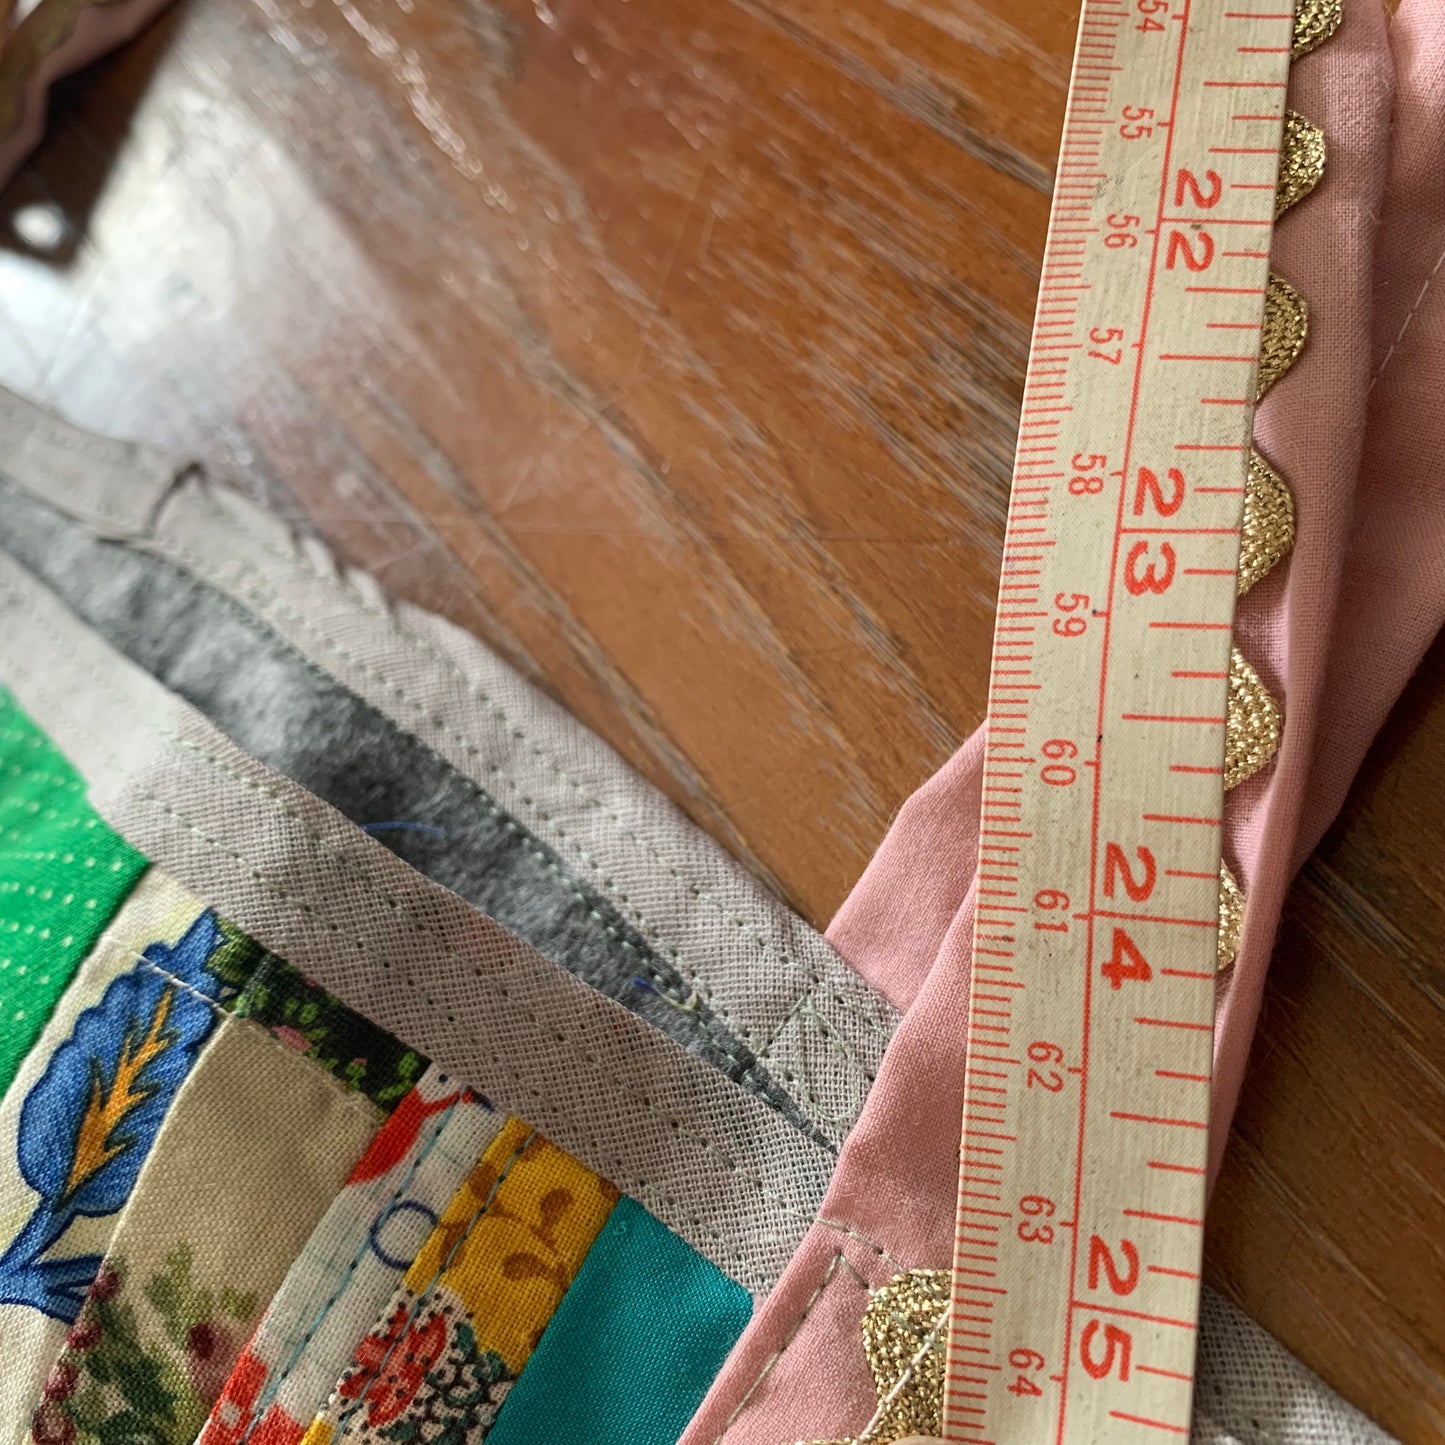 measuring tape along straps, closeup on measure of 25 inches